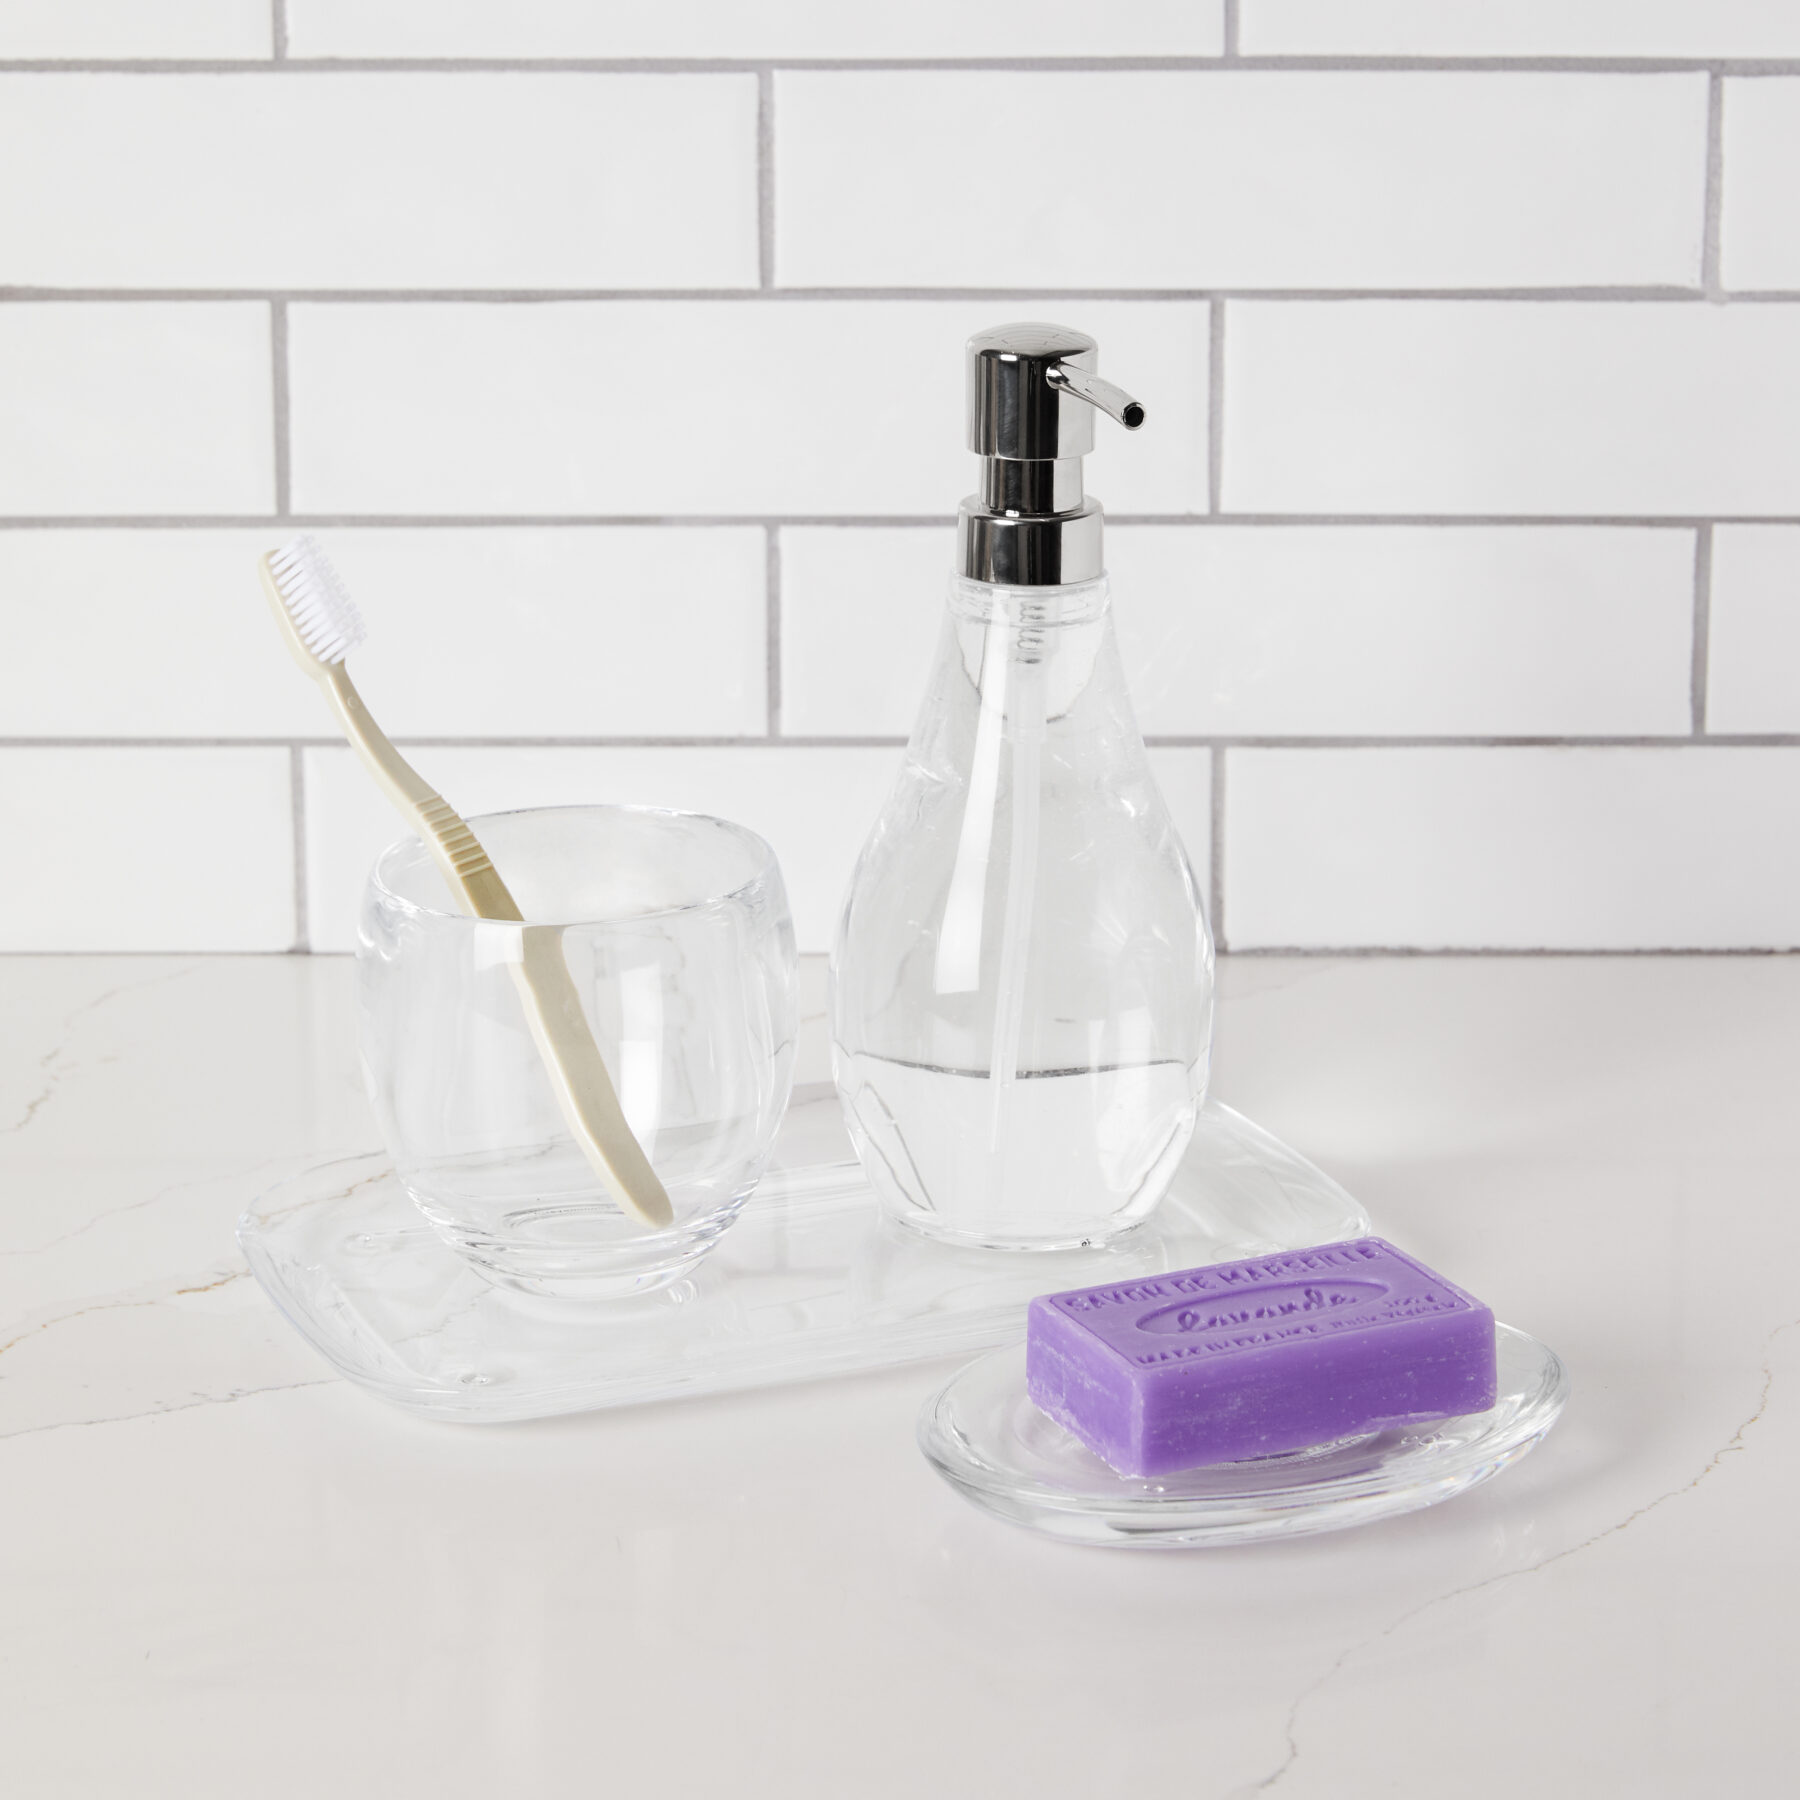 The Droplet Bathroom Tumbler from Umbra is simple in style and form. Made from crystal clear